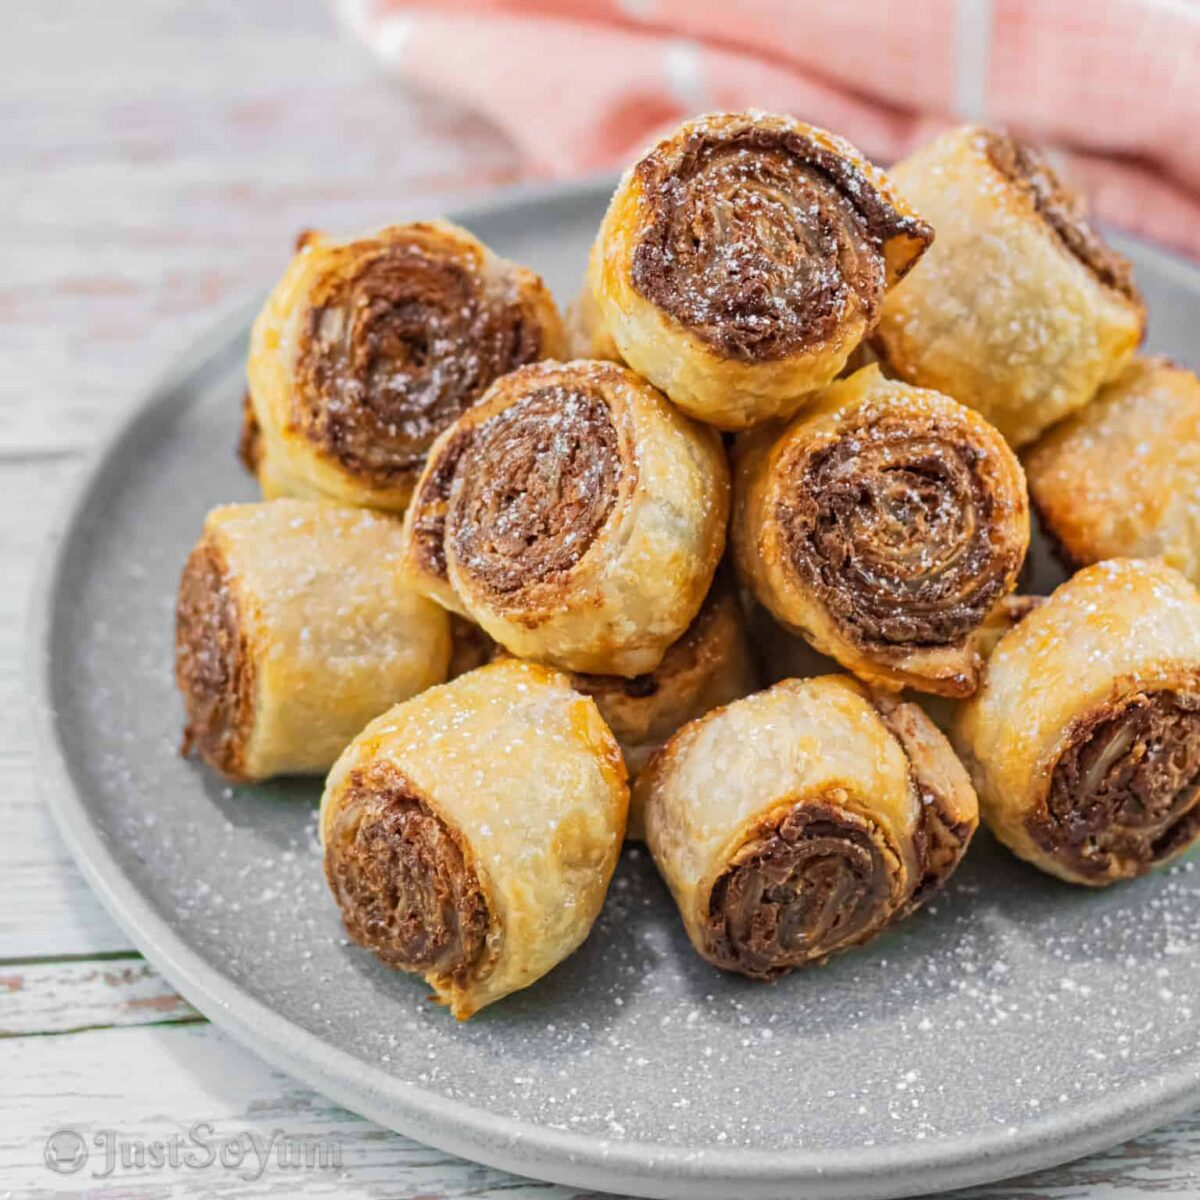 featured-image-for-air-fryer-nutella-and-peanut-butter-pinwheel-bites